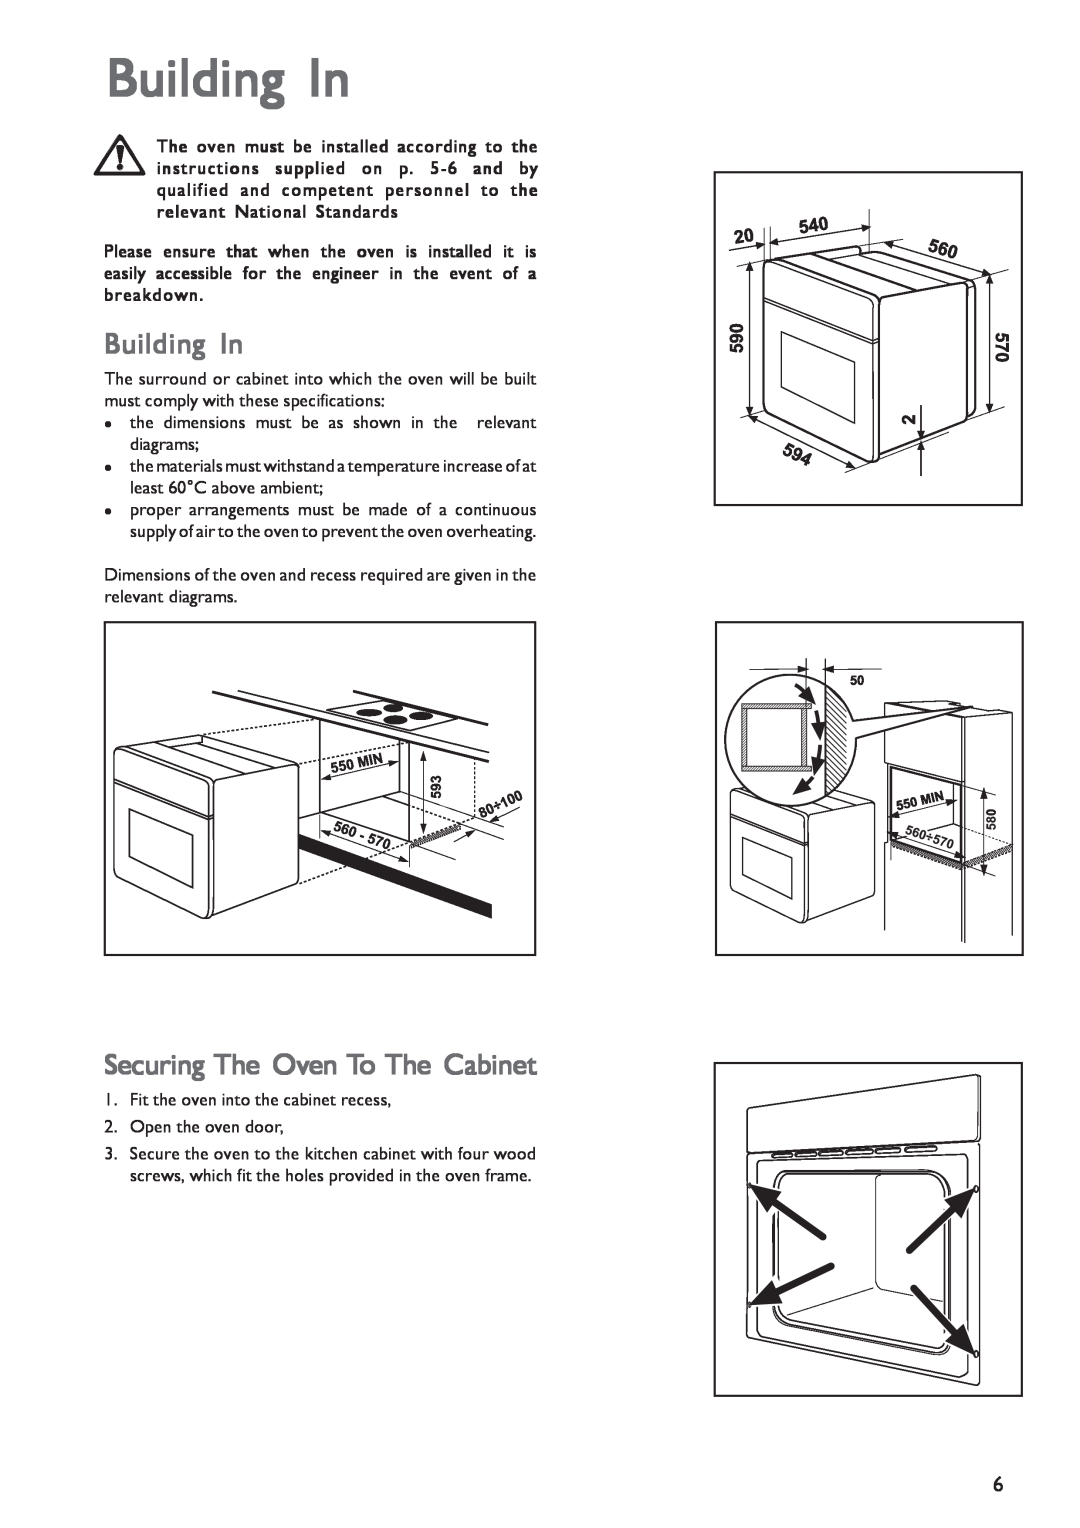 John Lewis JLBIOS603 instruction manual Building In, Securing The Oven To The Cabinet 